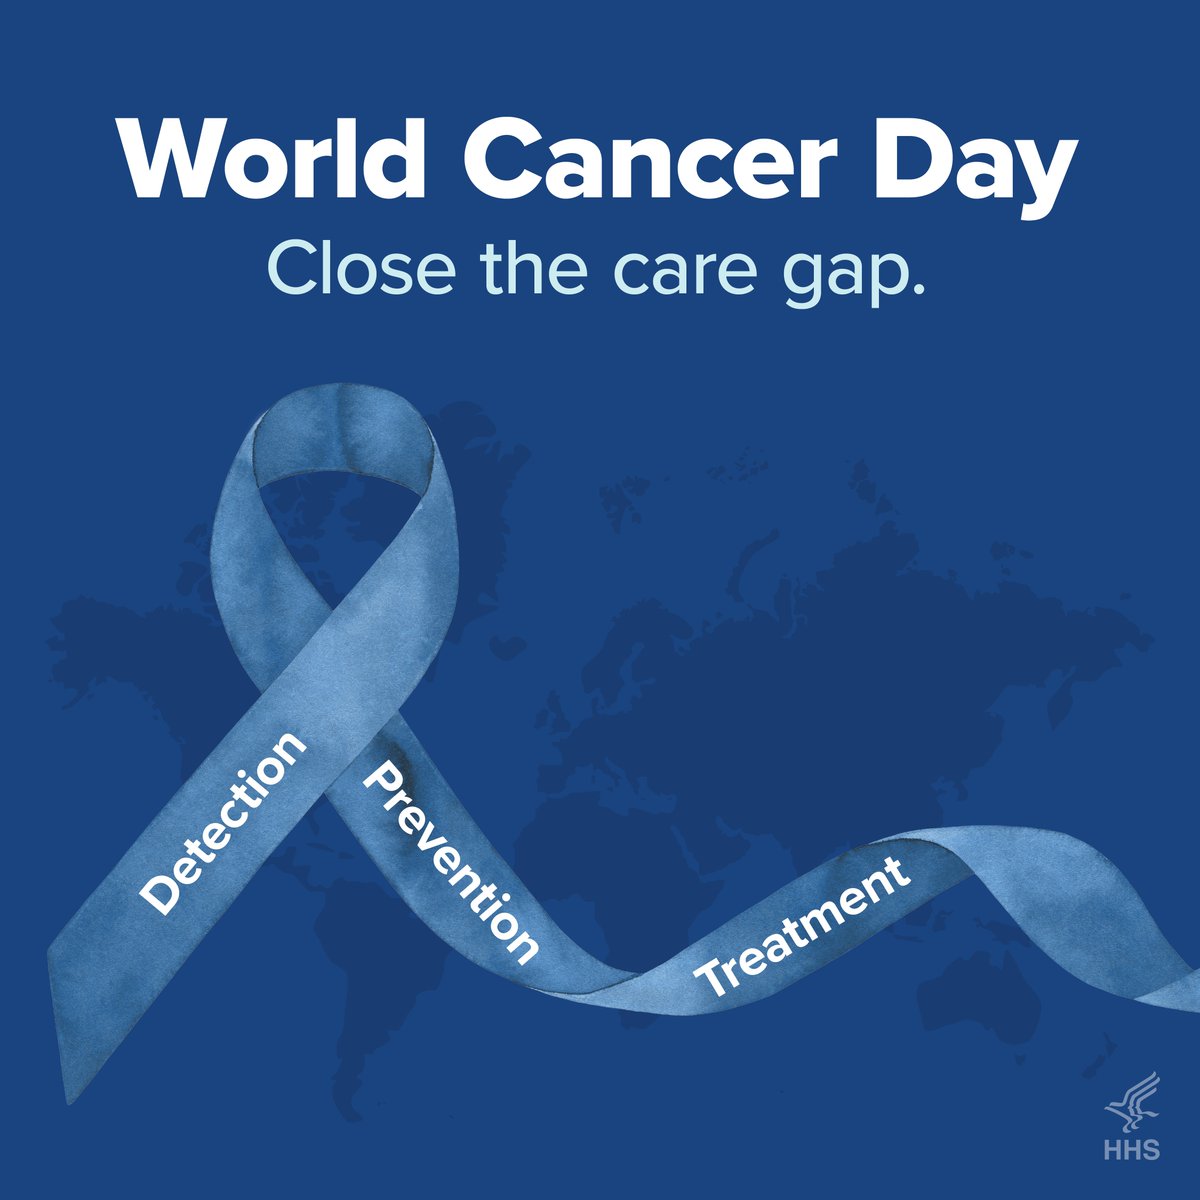 Everyone deserves access to the resources they need to prevent cancer, find it early, and get proper treatment. On World Cancer Day, let's recommit to health equity and creating a future without cancer. Learn more from @NIH at cancer.gov/research/key-i…. #GlobalCancerMoonshot